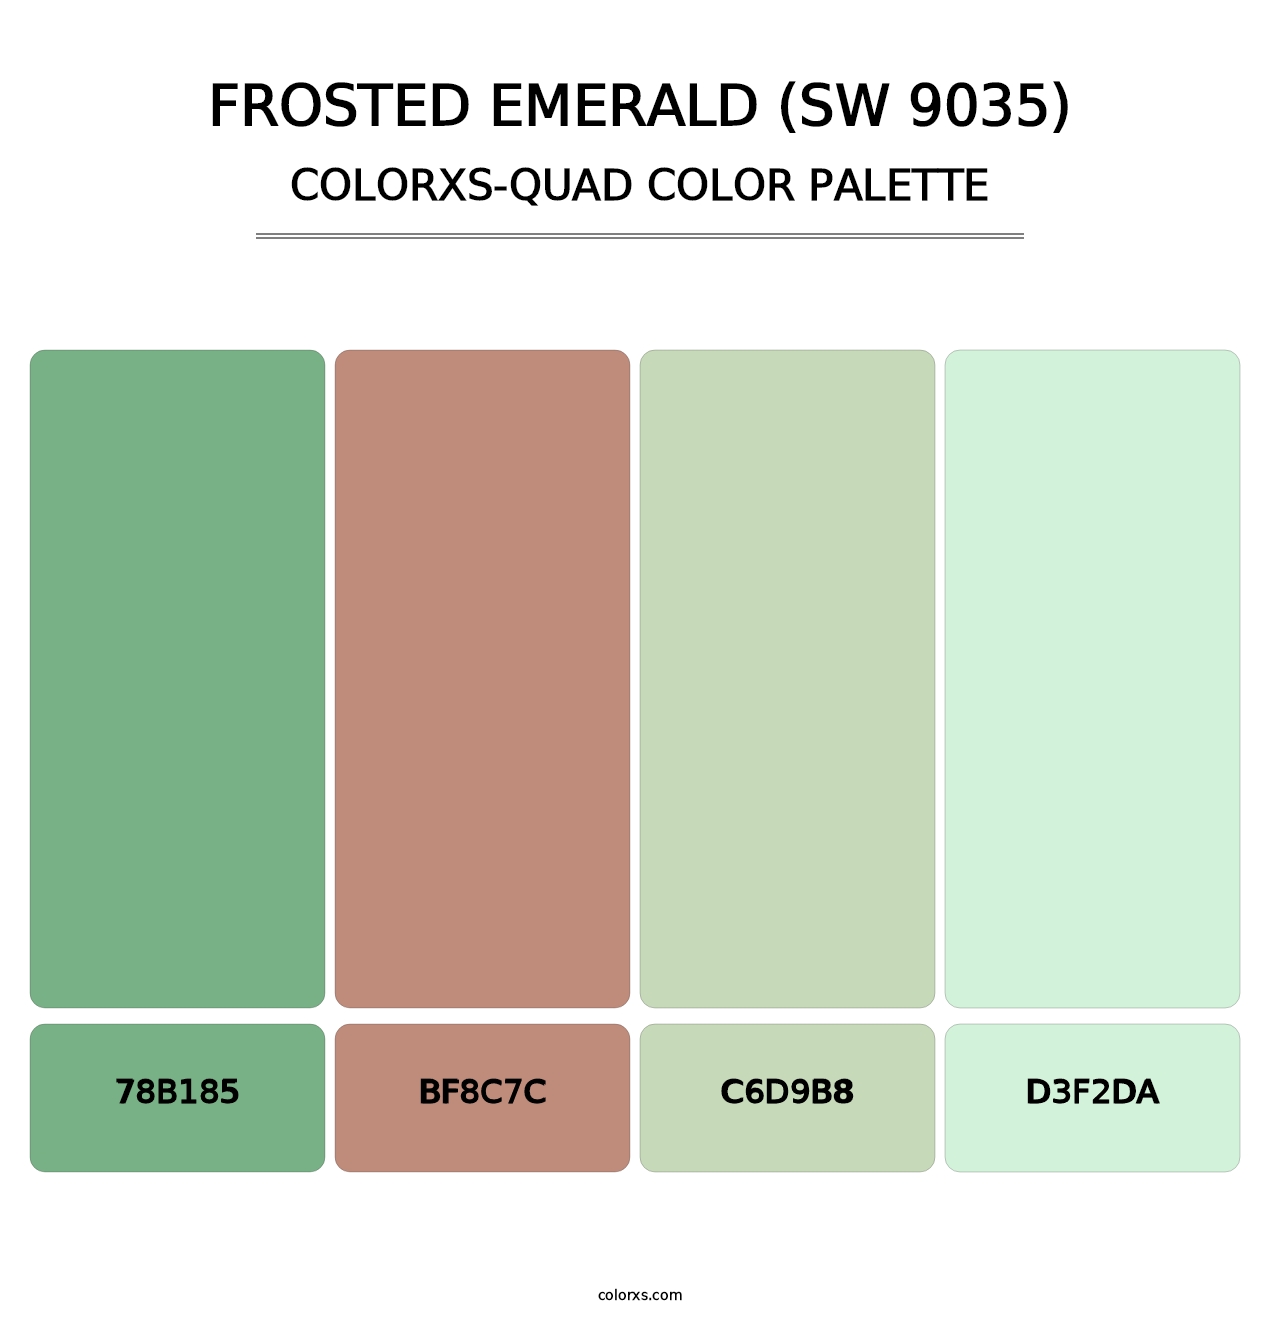 Frosted Emerald (SW 9035) - Colorxs Quad Palette